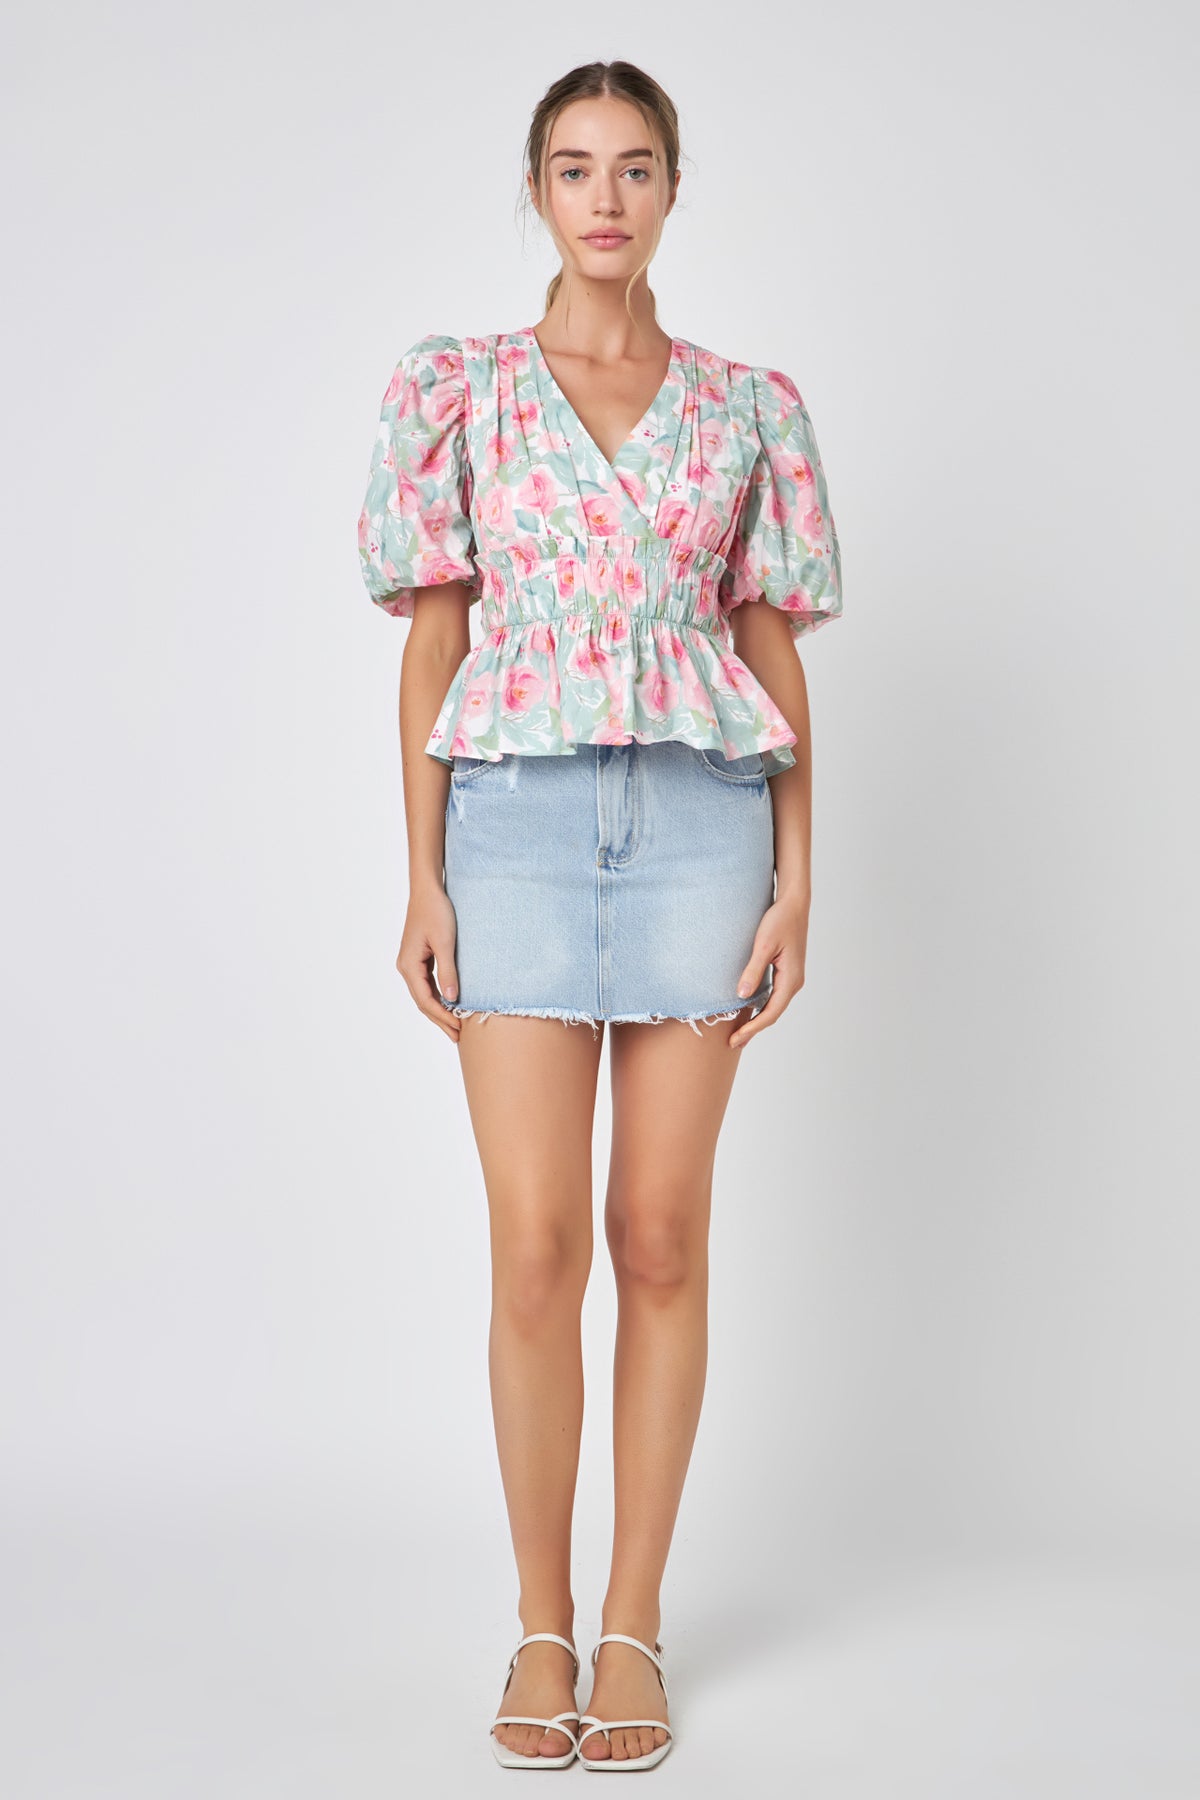 FREE THE ROSES - Floral Puff Sleeve Top - TOPS available at Objectrare